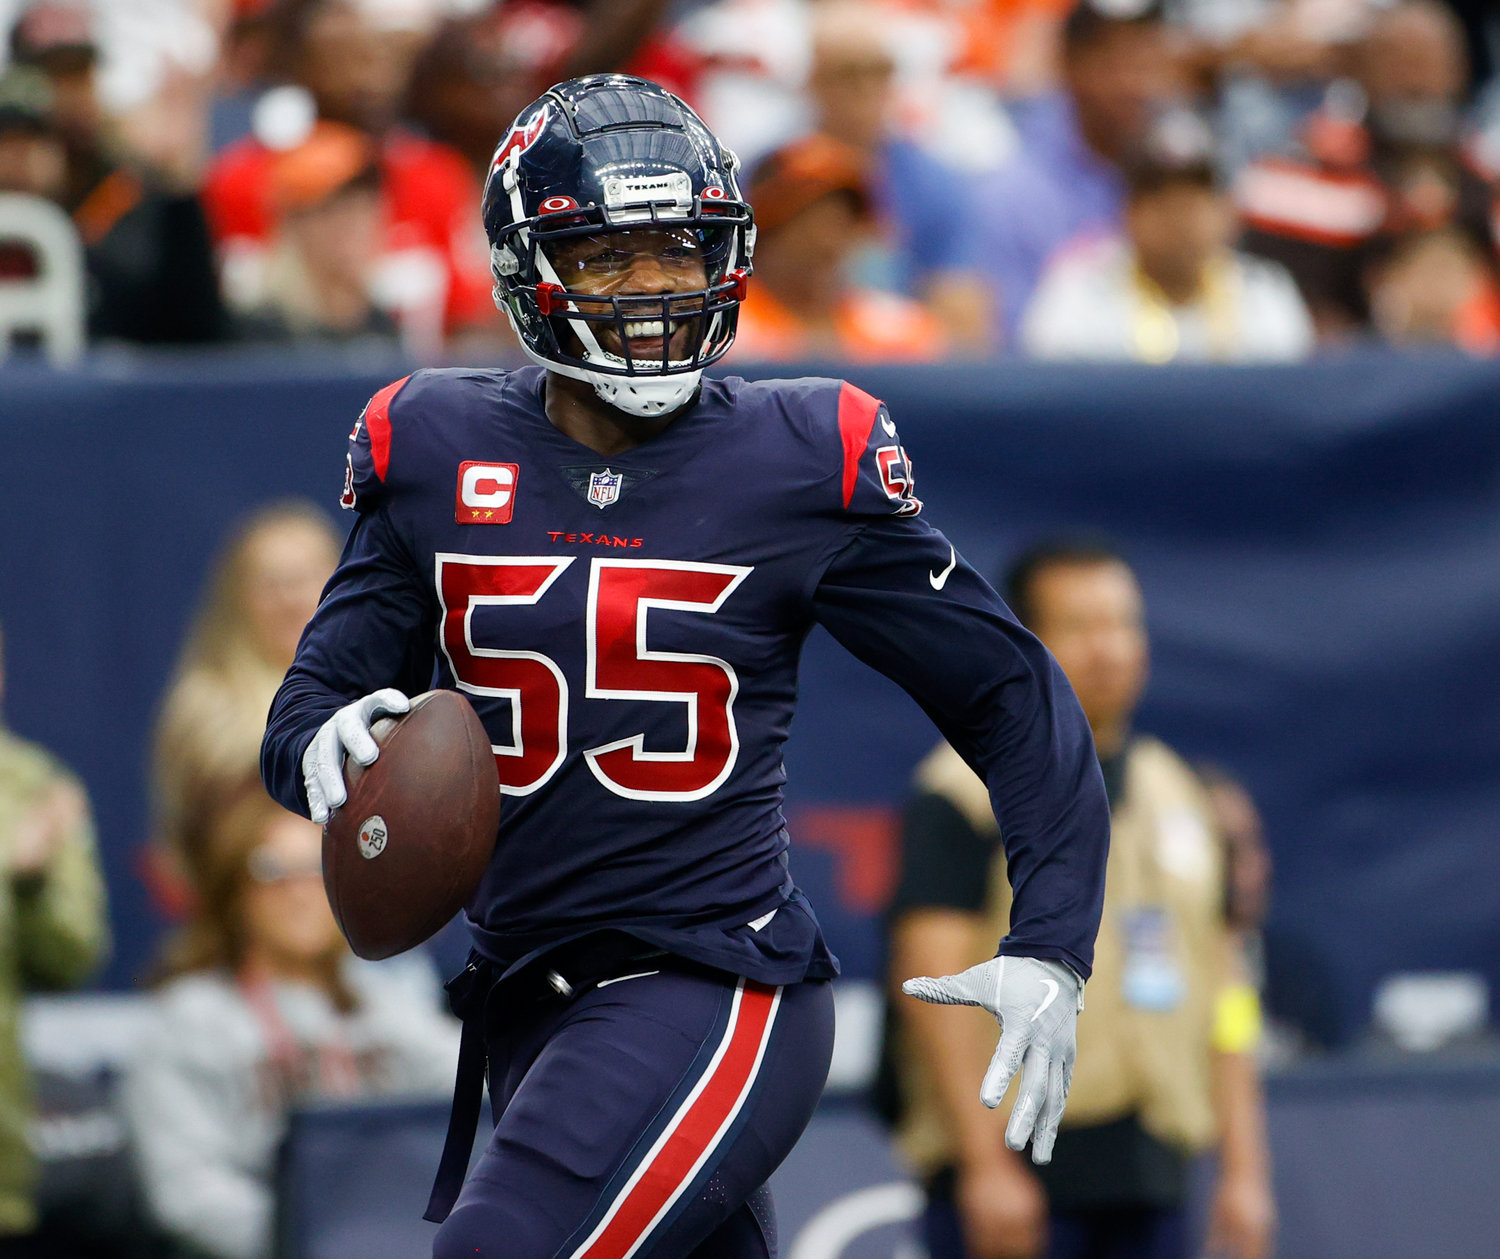 Houston Texans defensive end Jerry Hughes (55) during an NFL game between the Houston Texans and the Cleveland Browns on Dec. 4, 2022, in Houston. The Browns won, 27-14.